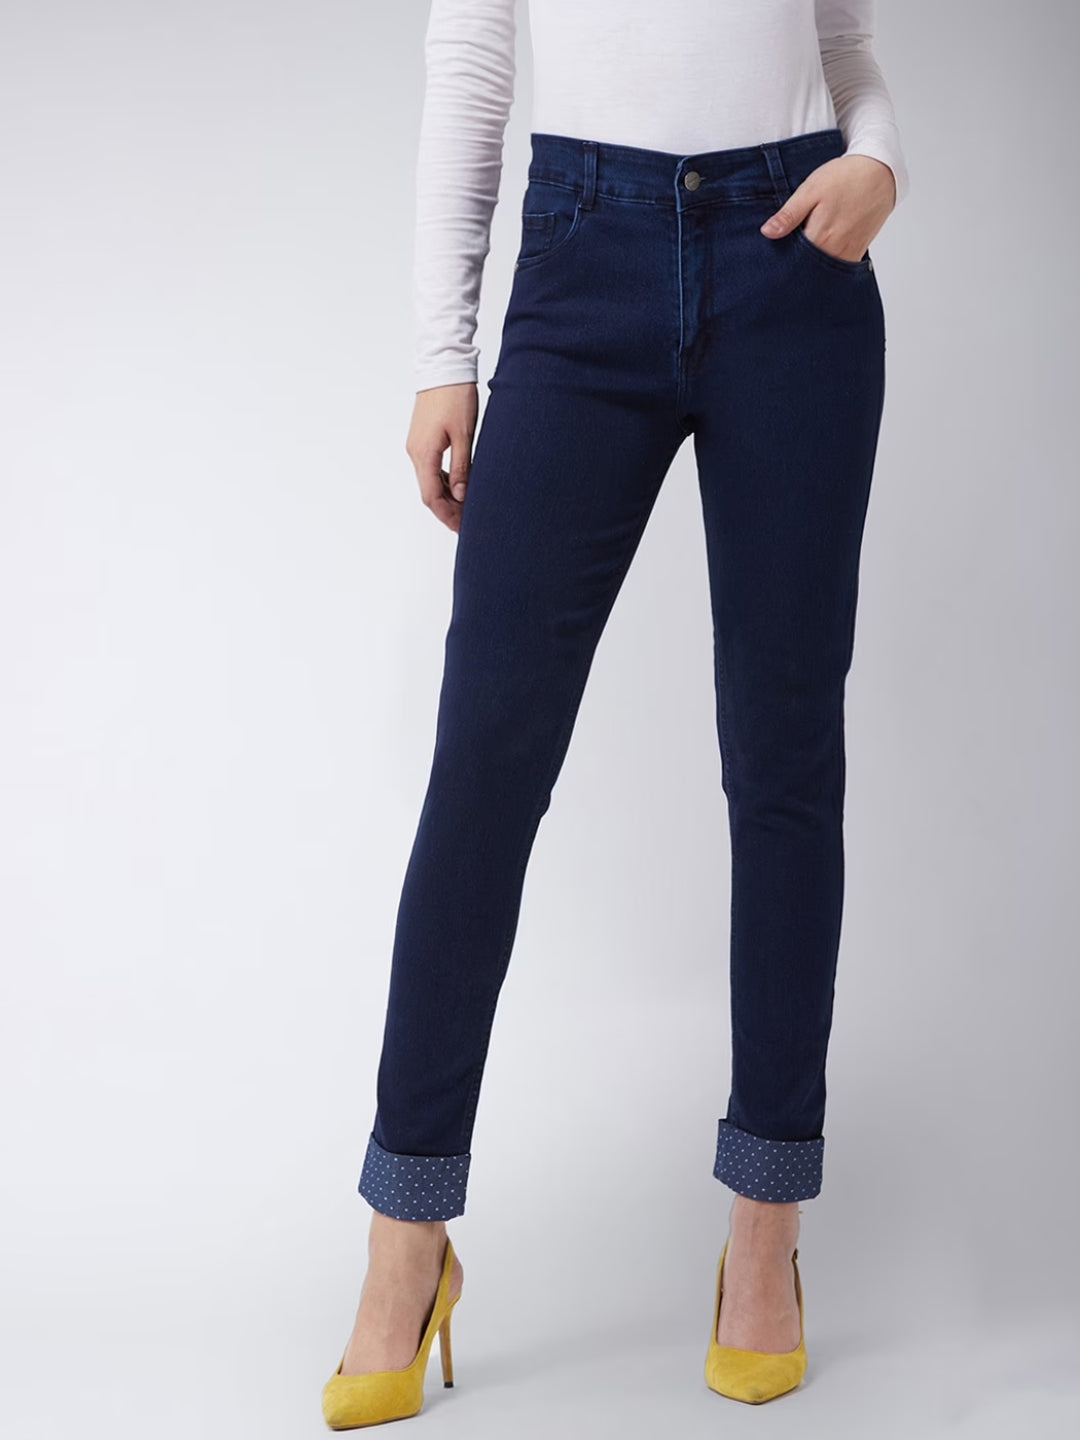 MISS CHASE | Women's Blue Solid Slim Jeans